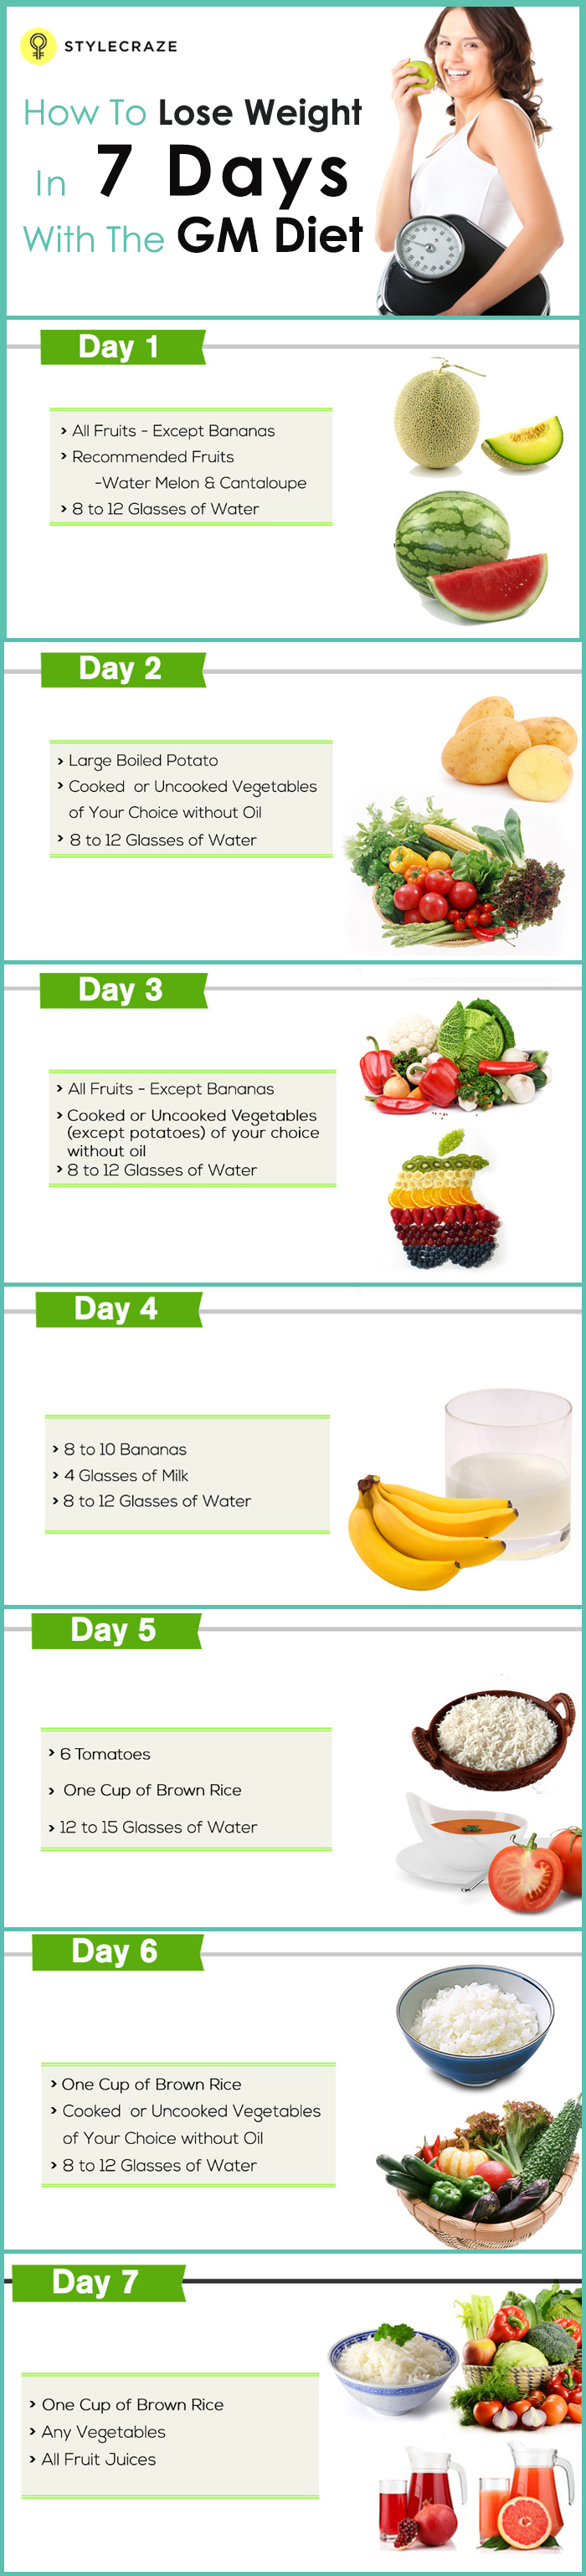 Lose 10 Pounds in a Week SevenDay Diet Plan CalorieBee 7 day